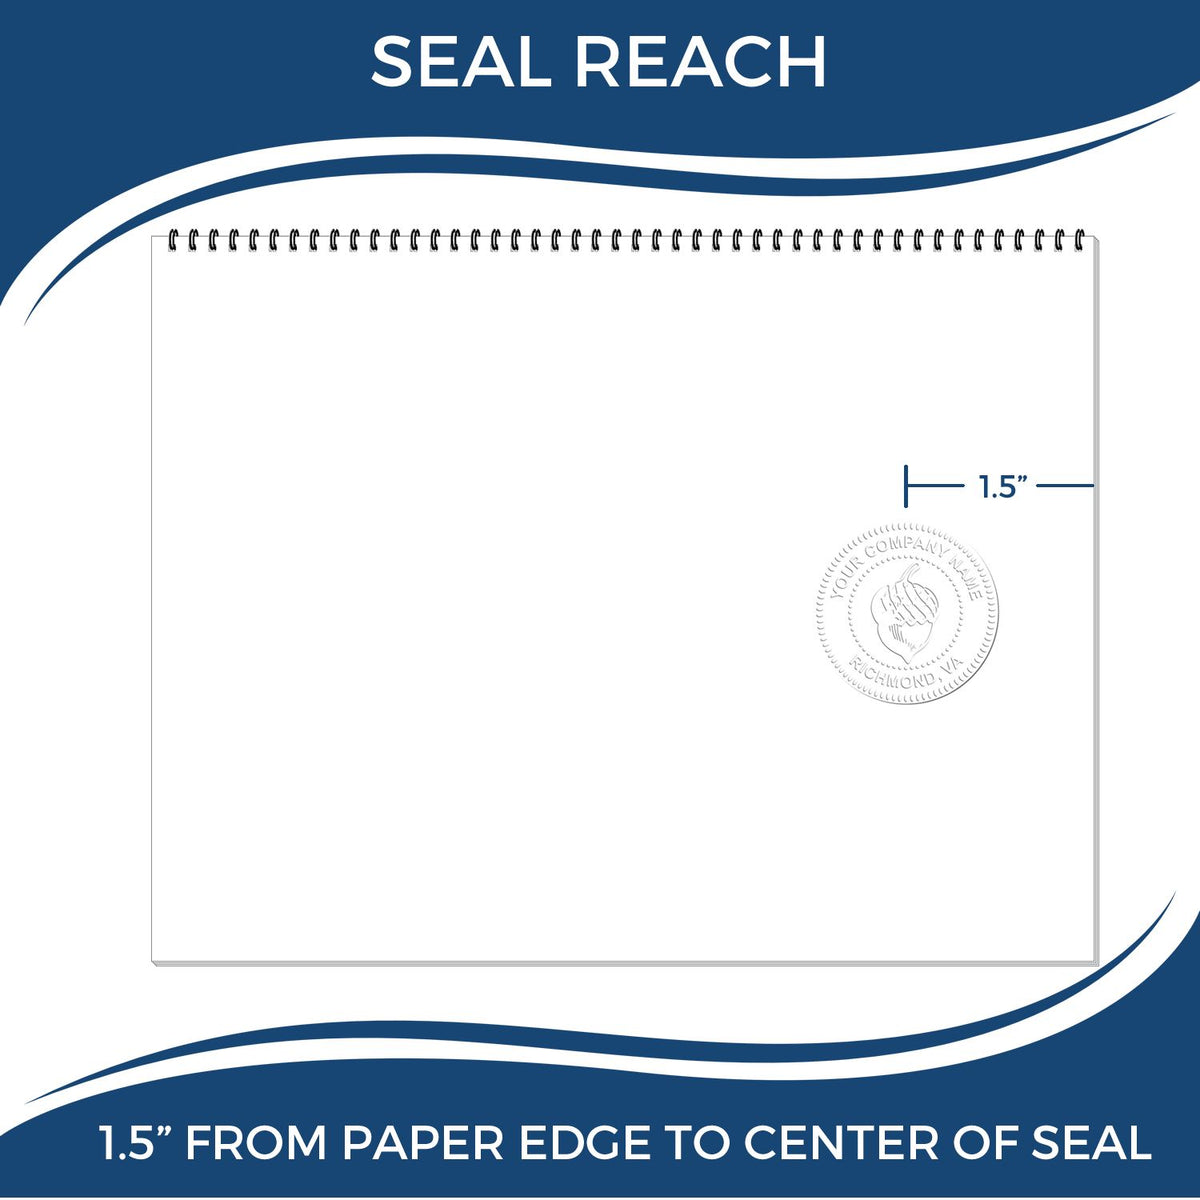 An infographic showing the seal reach which is represented by a ruler and a miniature seal image of the Soft District of Columbia Professional Geologist Seal